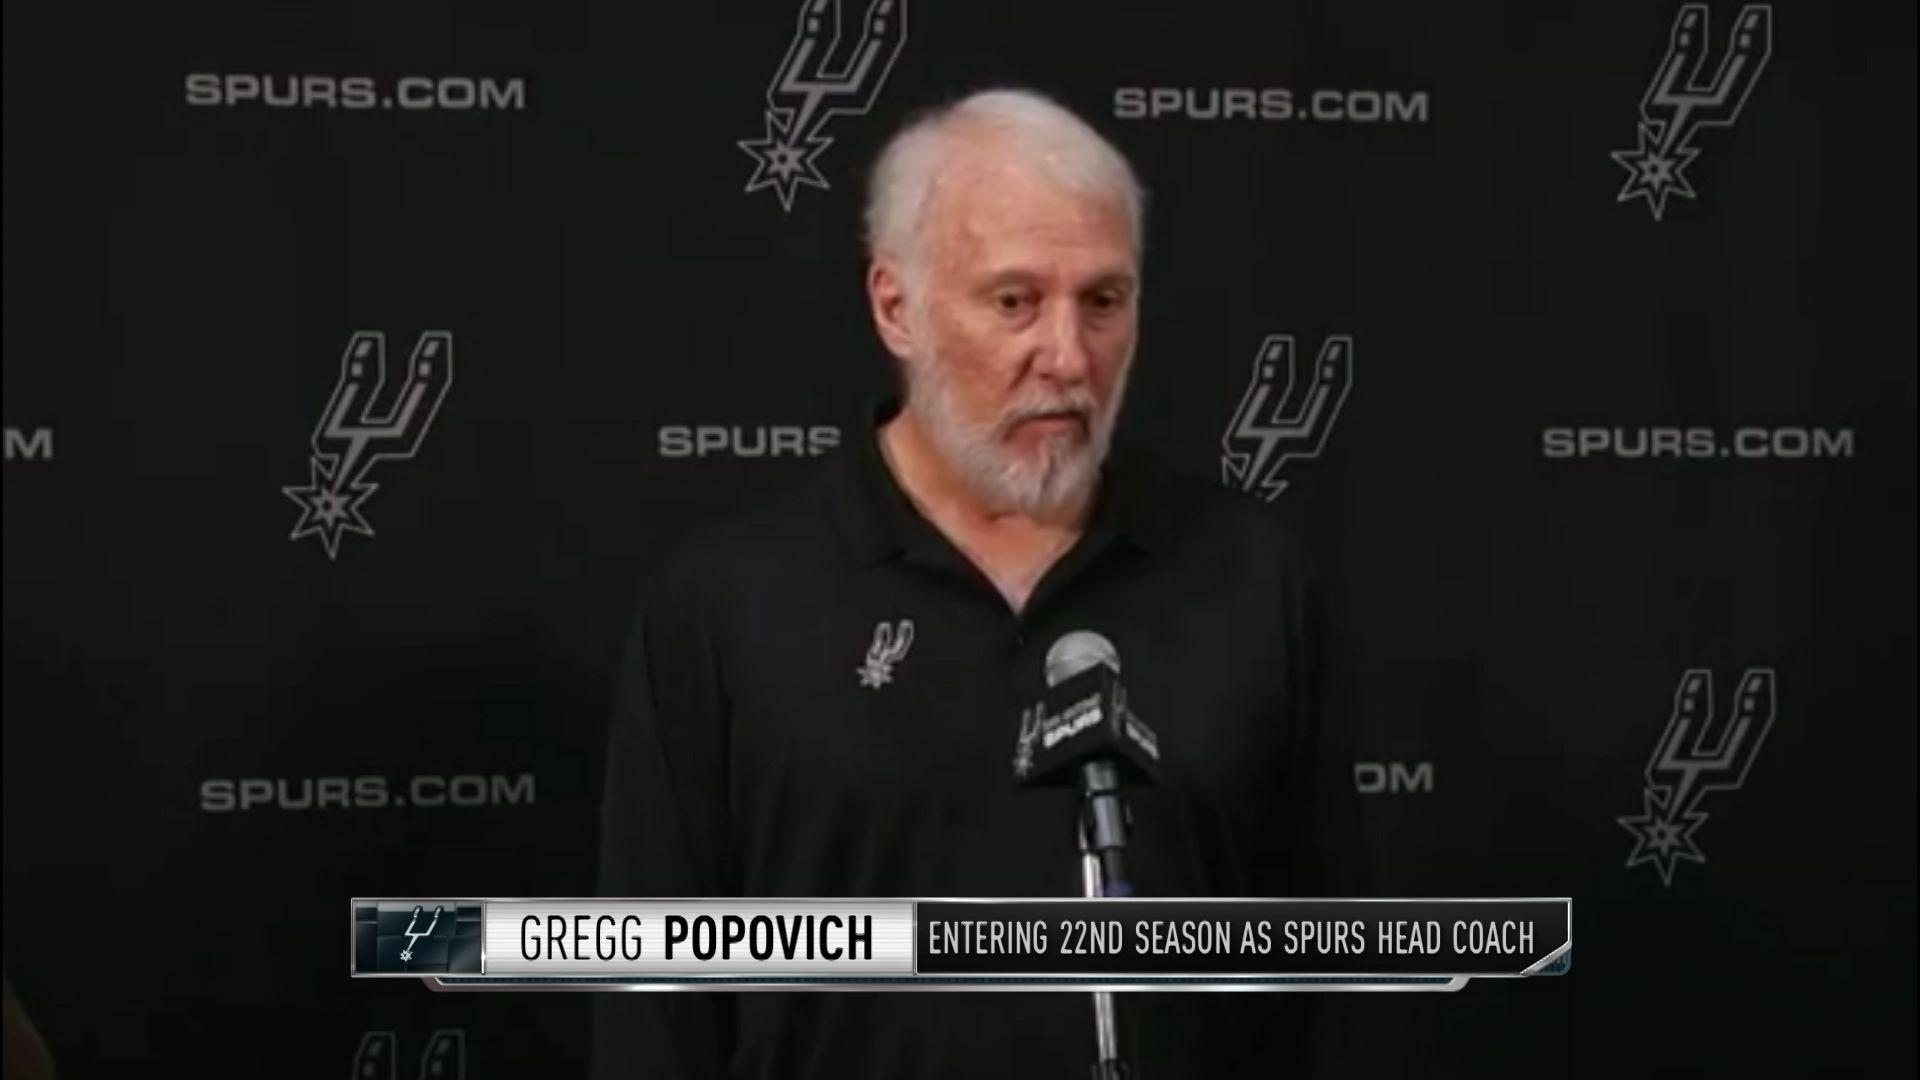 Popovich Country's An Embarrassment In The World